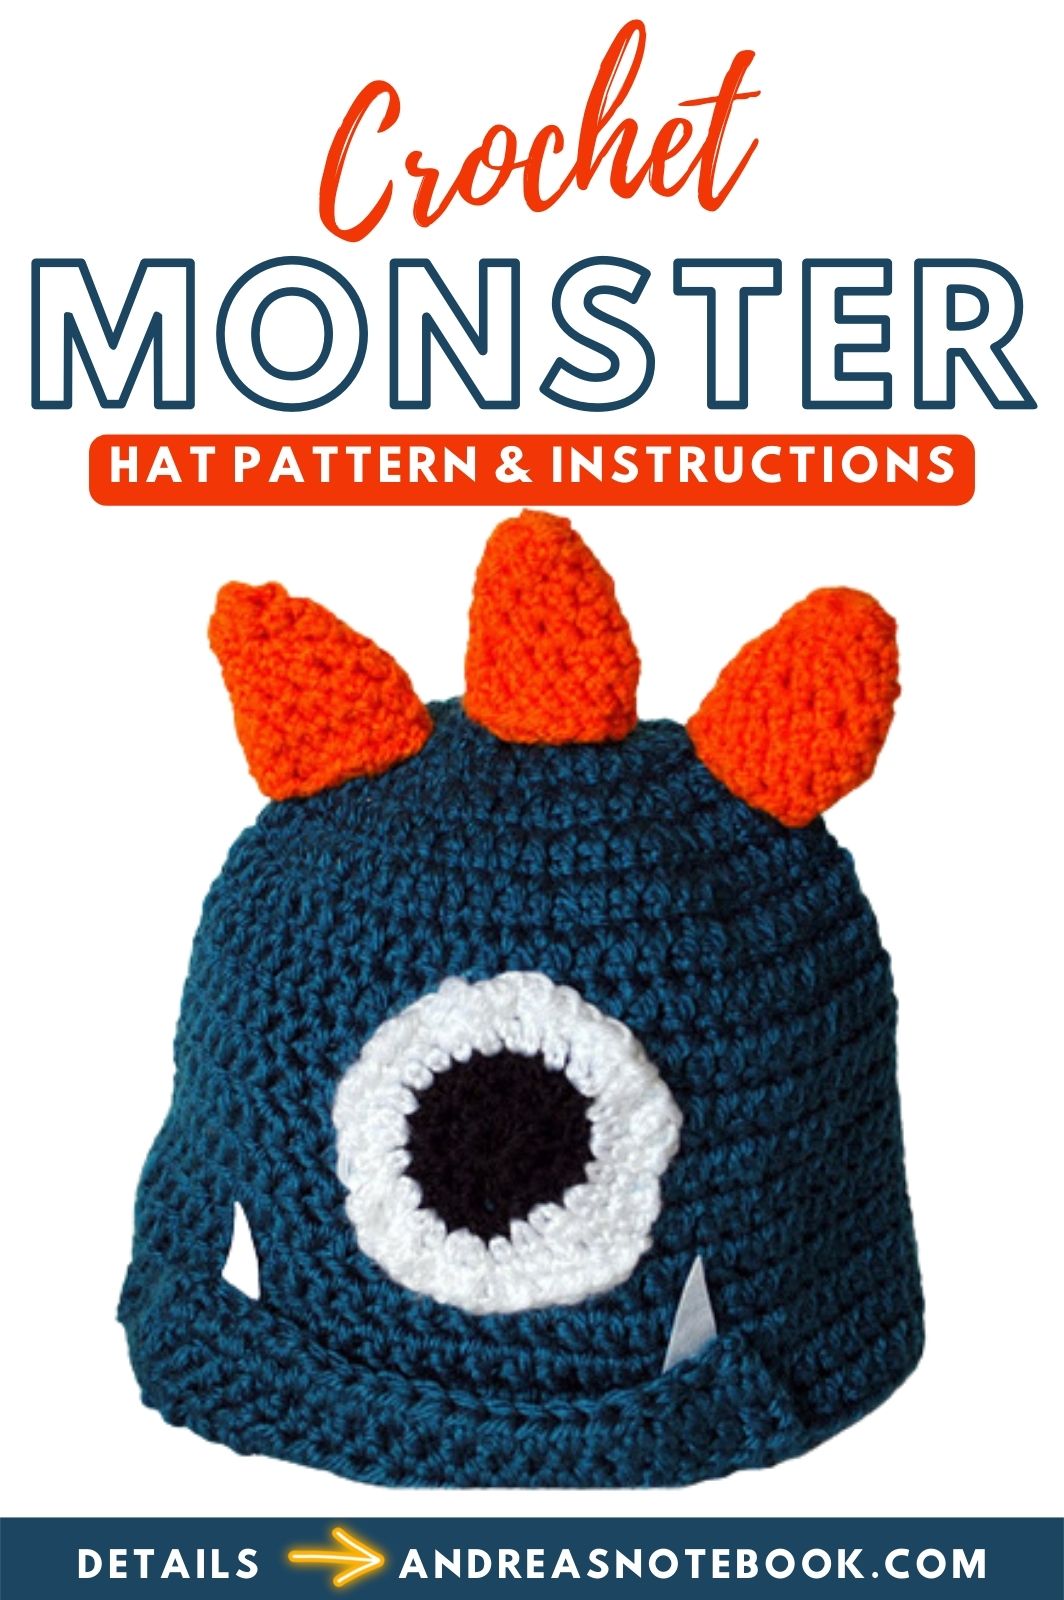 Image of crocheted monster hat with spikes and one eye.